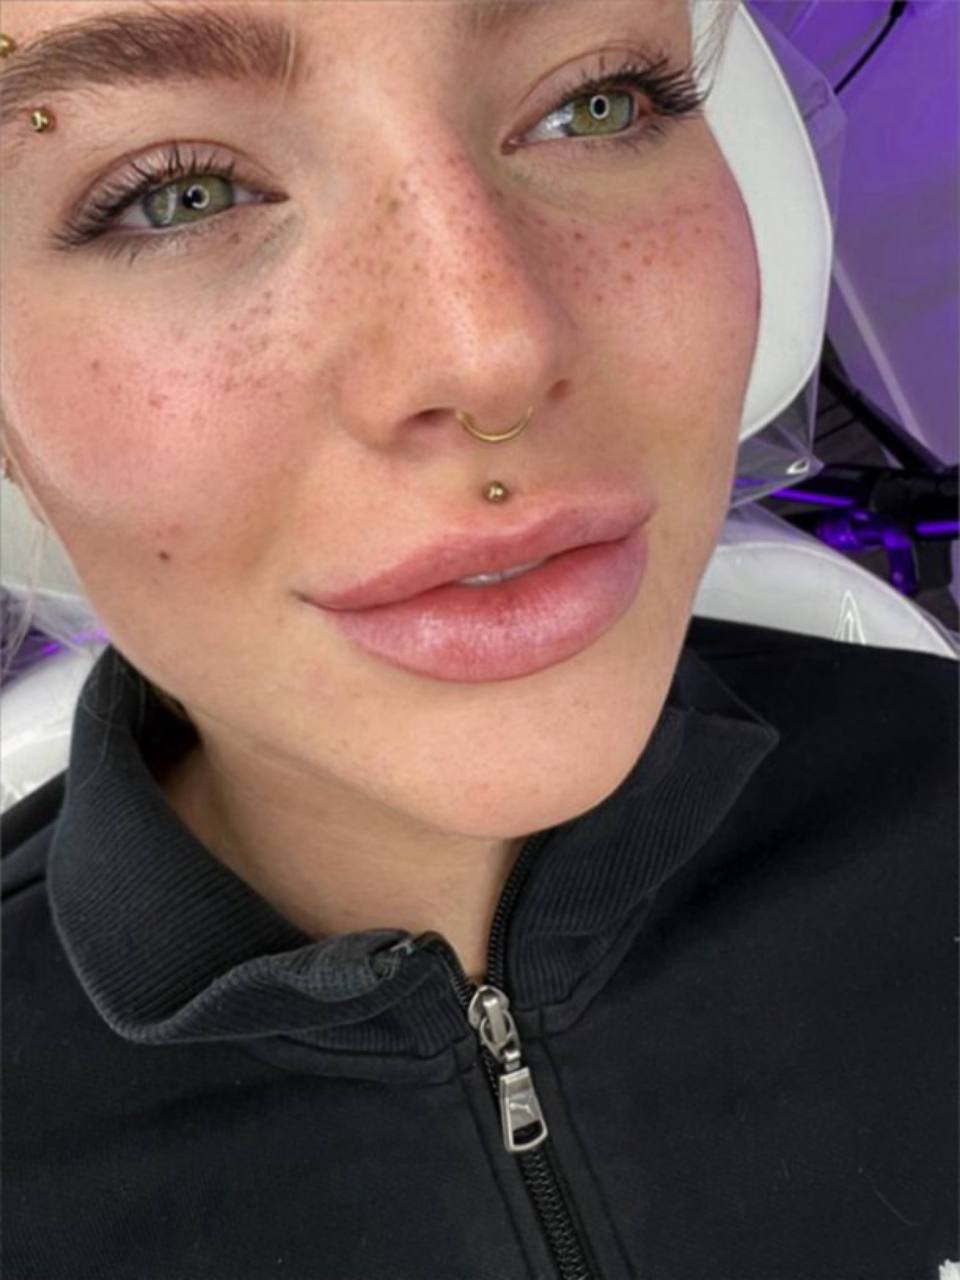 Lip Outline Cosmetic Tattoo. Cosmetic and Mediical Tattoo by Dasha. Permanent makeup and reconstructive tattoo, scalp micro-pigmentation in Christchurch, New Zealand